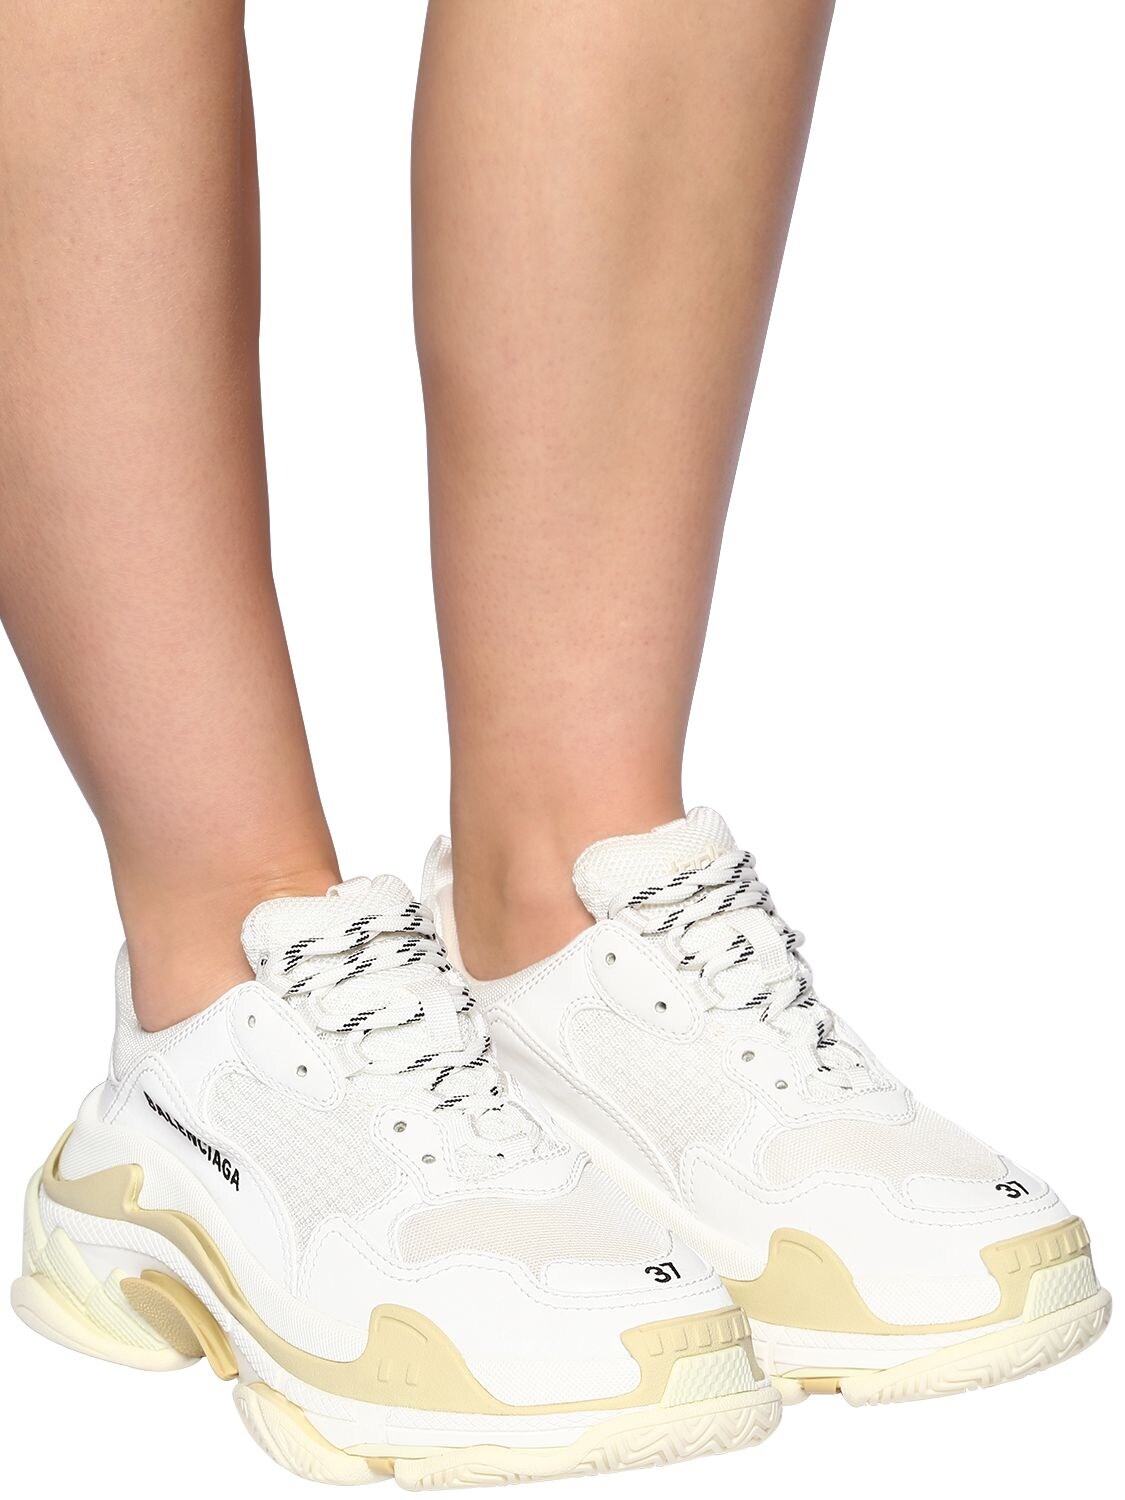 Shop Balenciaga 60mm Triple S Faux Leather Sneakers In White